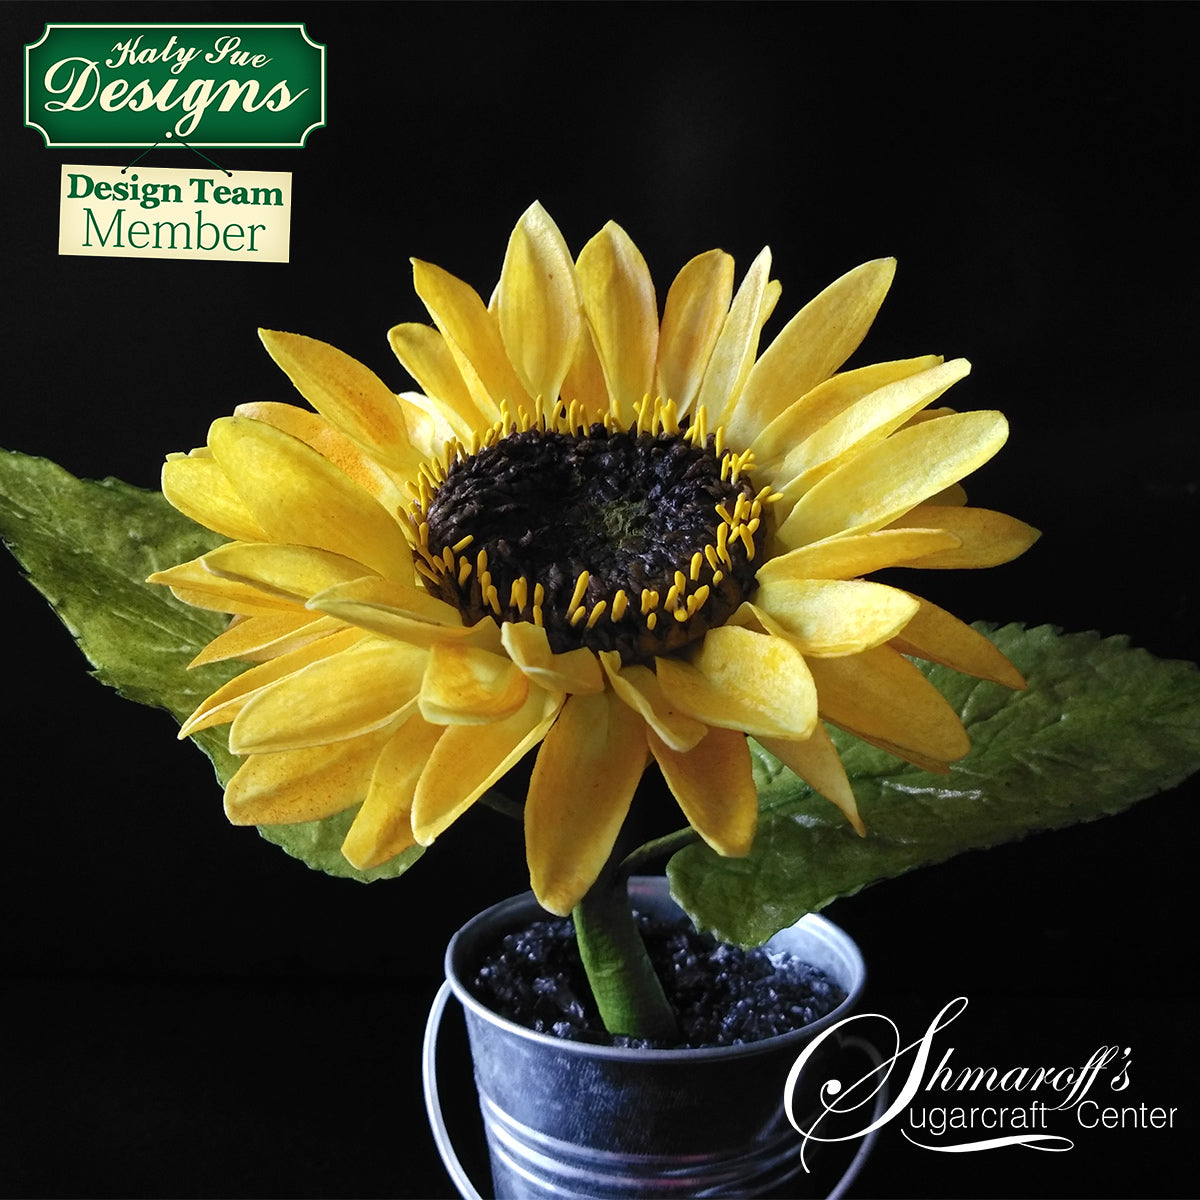 CD - Flower Pro Sunflower / Daisy Leaves Mould and Veiner